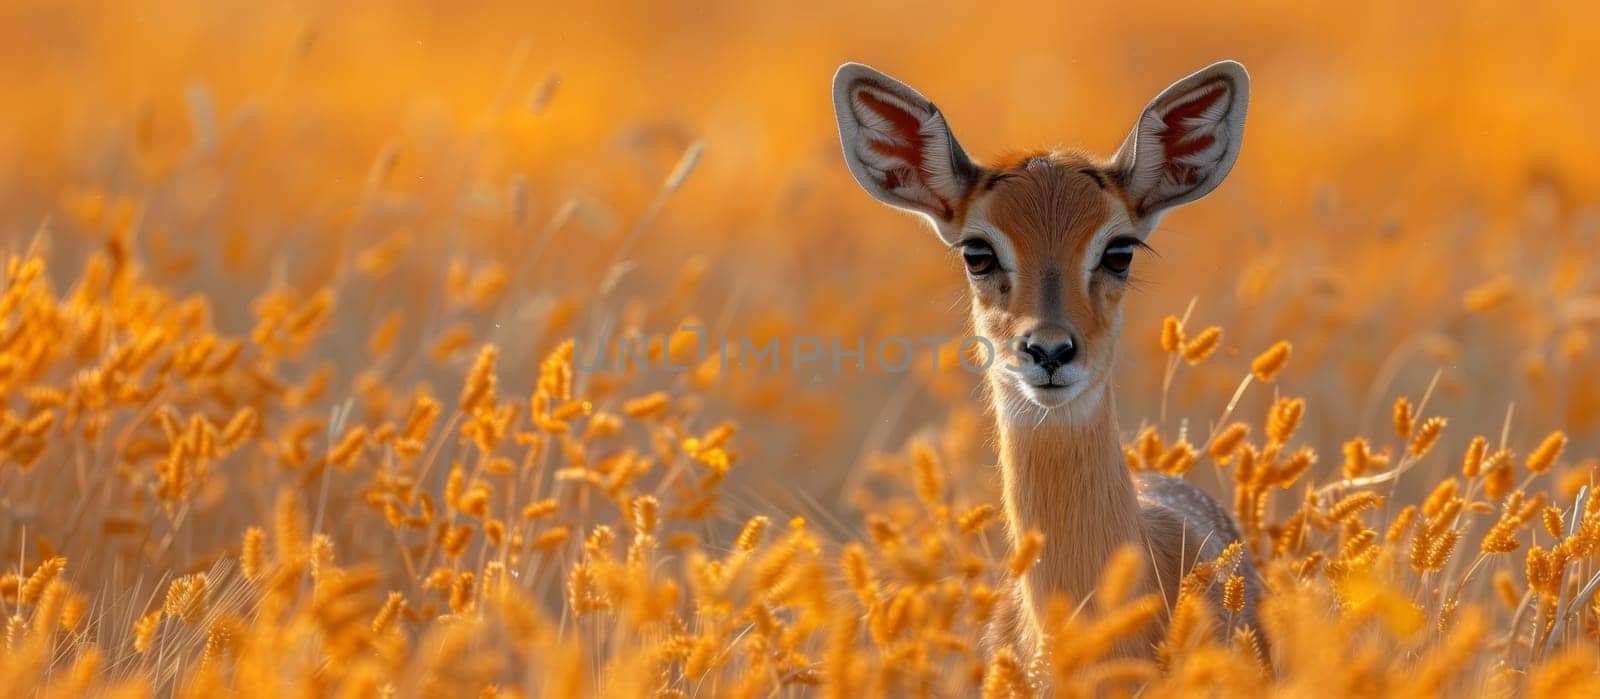 Deer in tall grass field, gazing at camera in natural landscape by richwolf